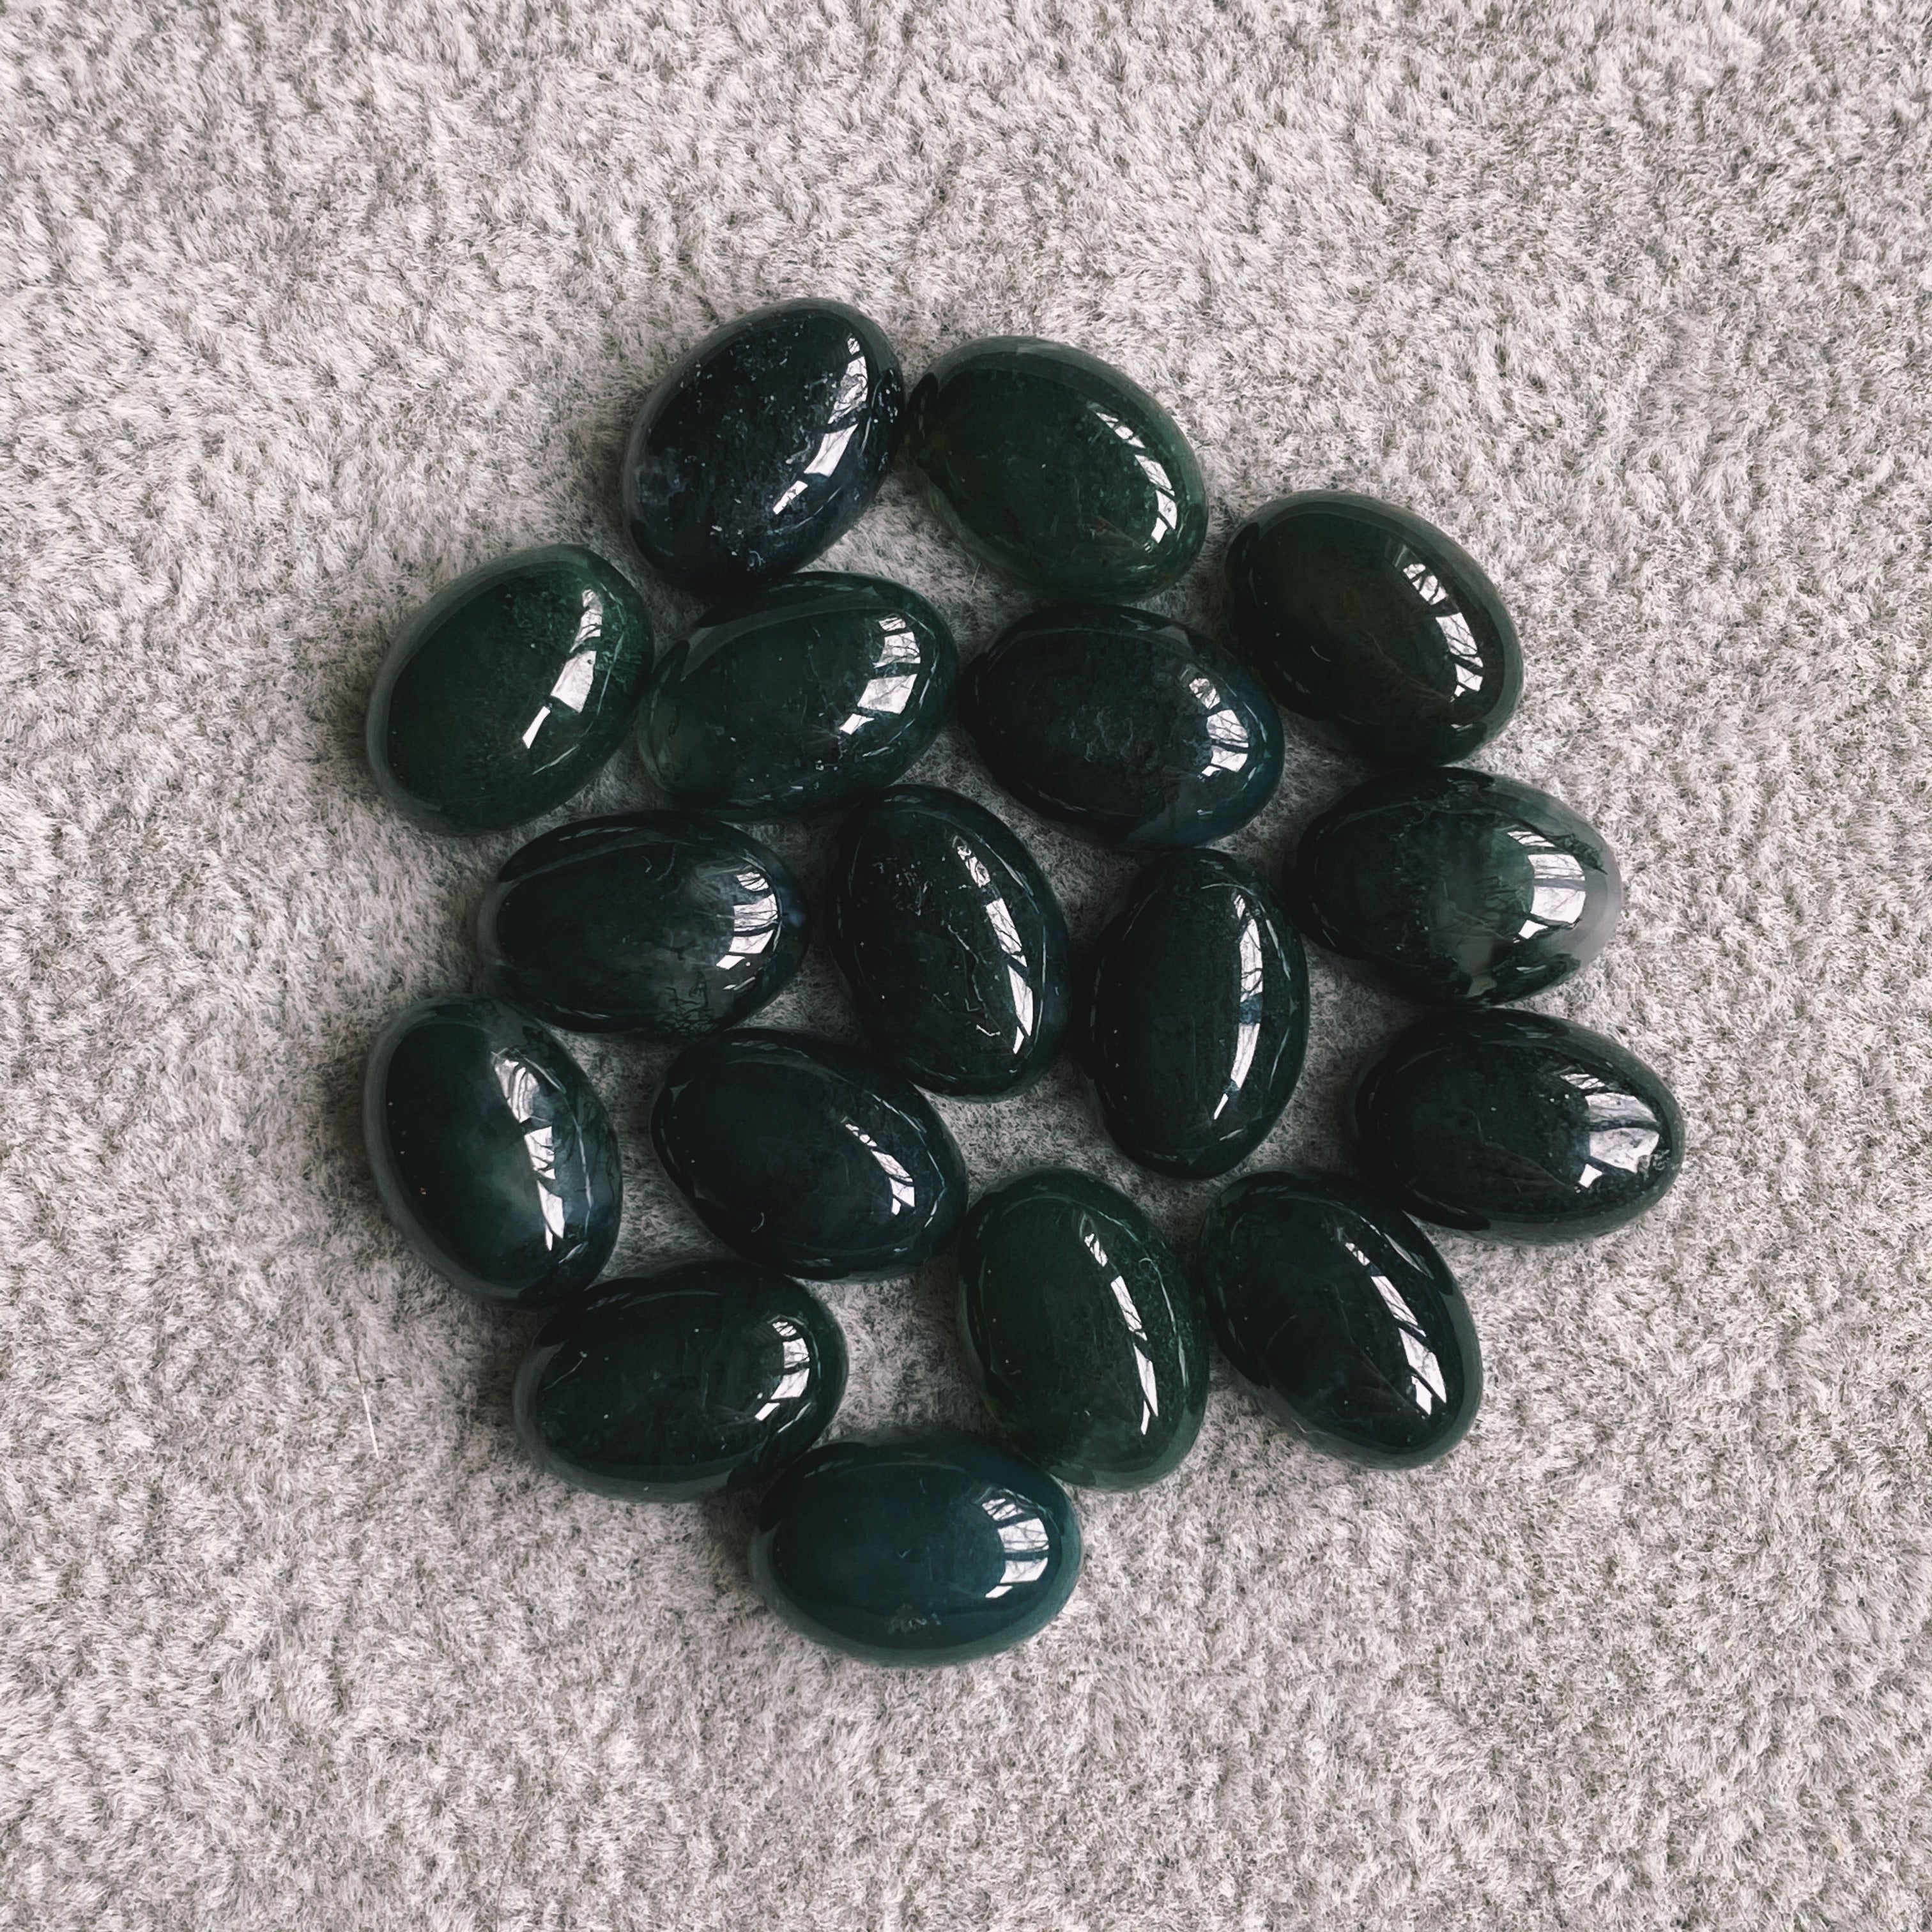 (1) Moss Agate Oval Cabochon